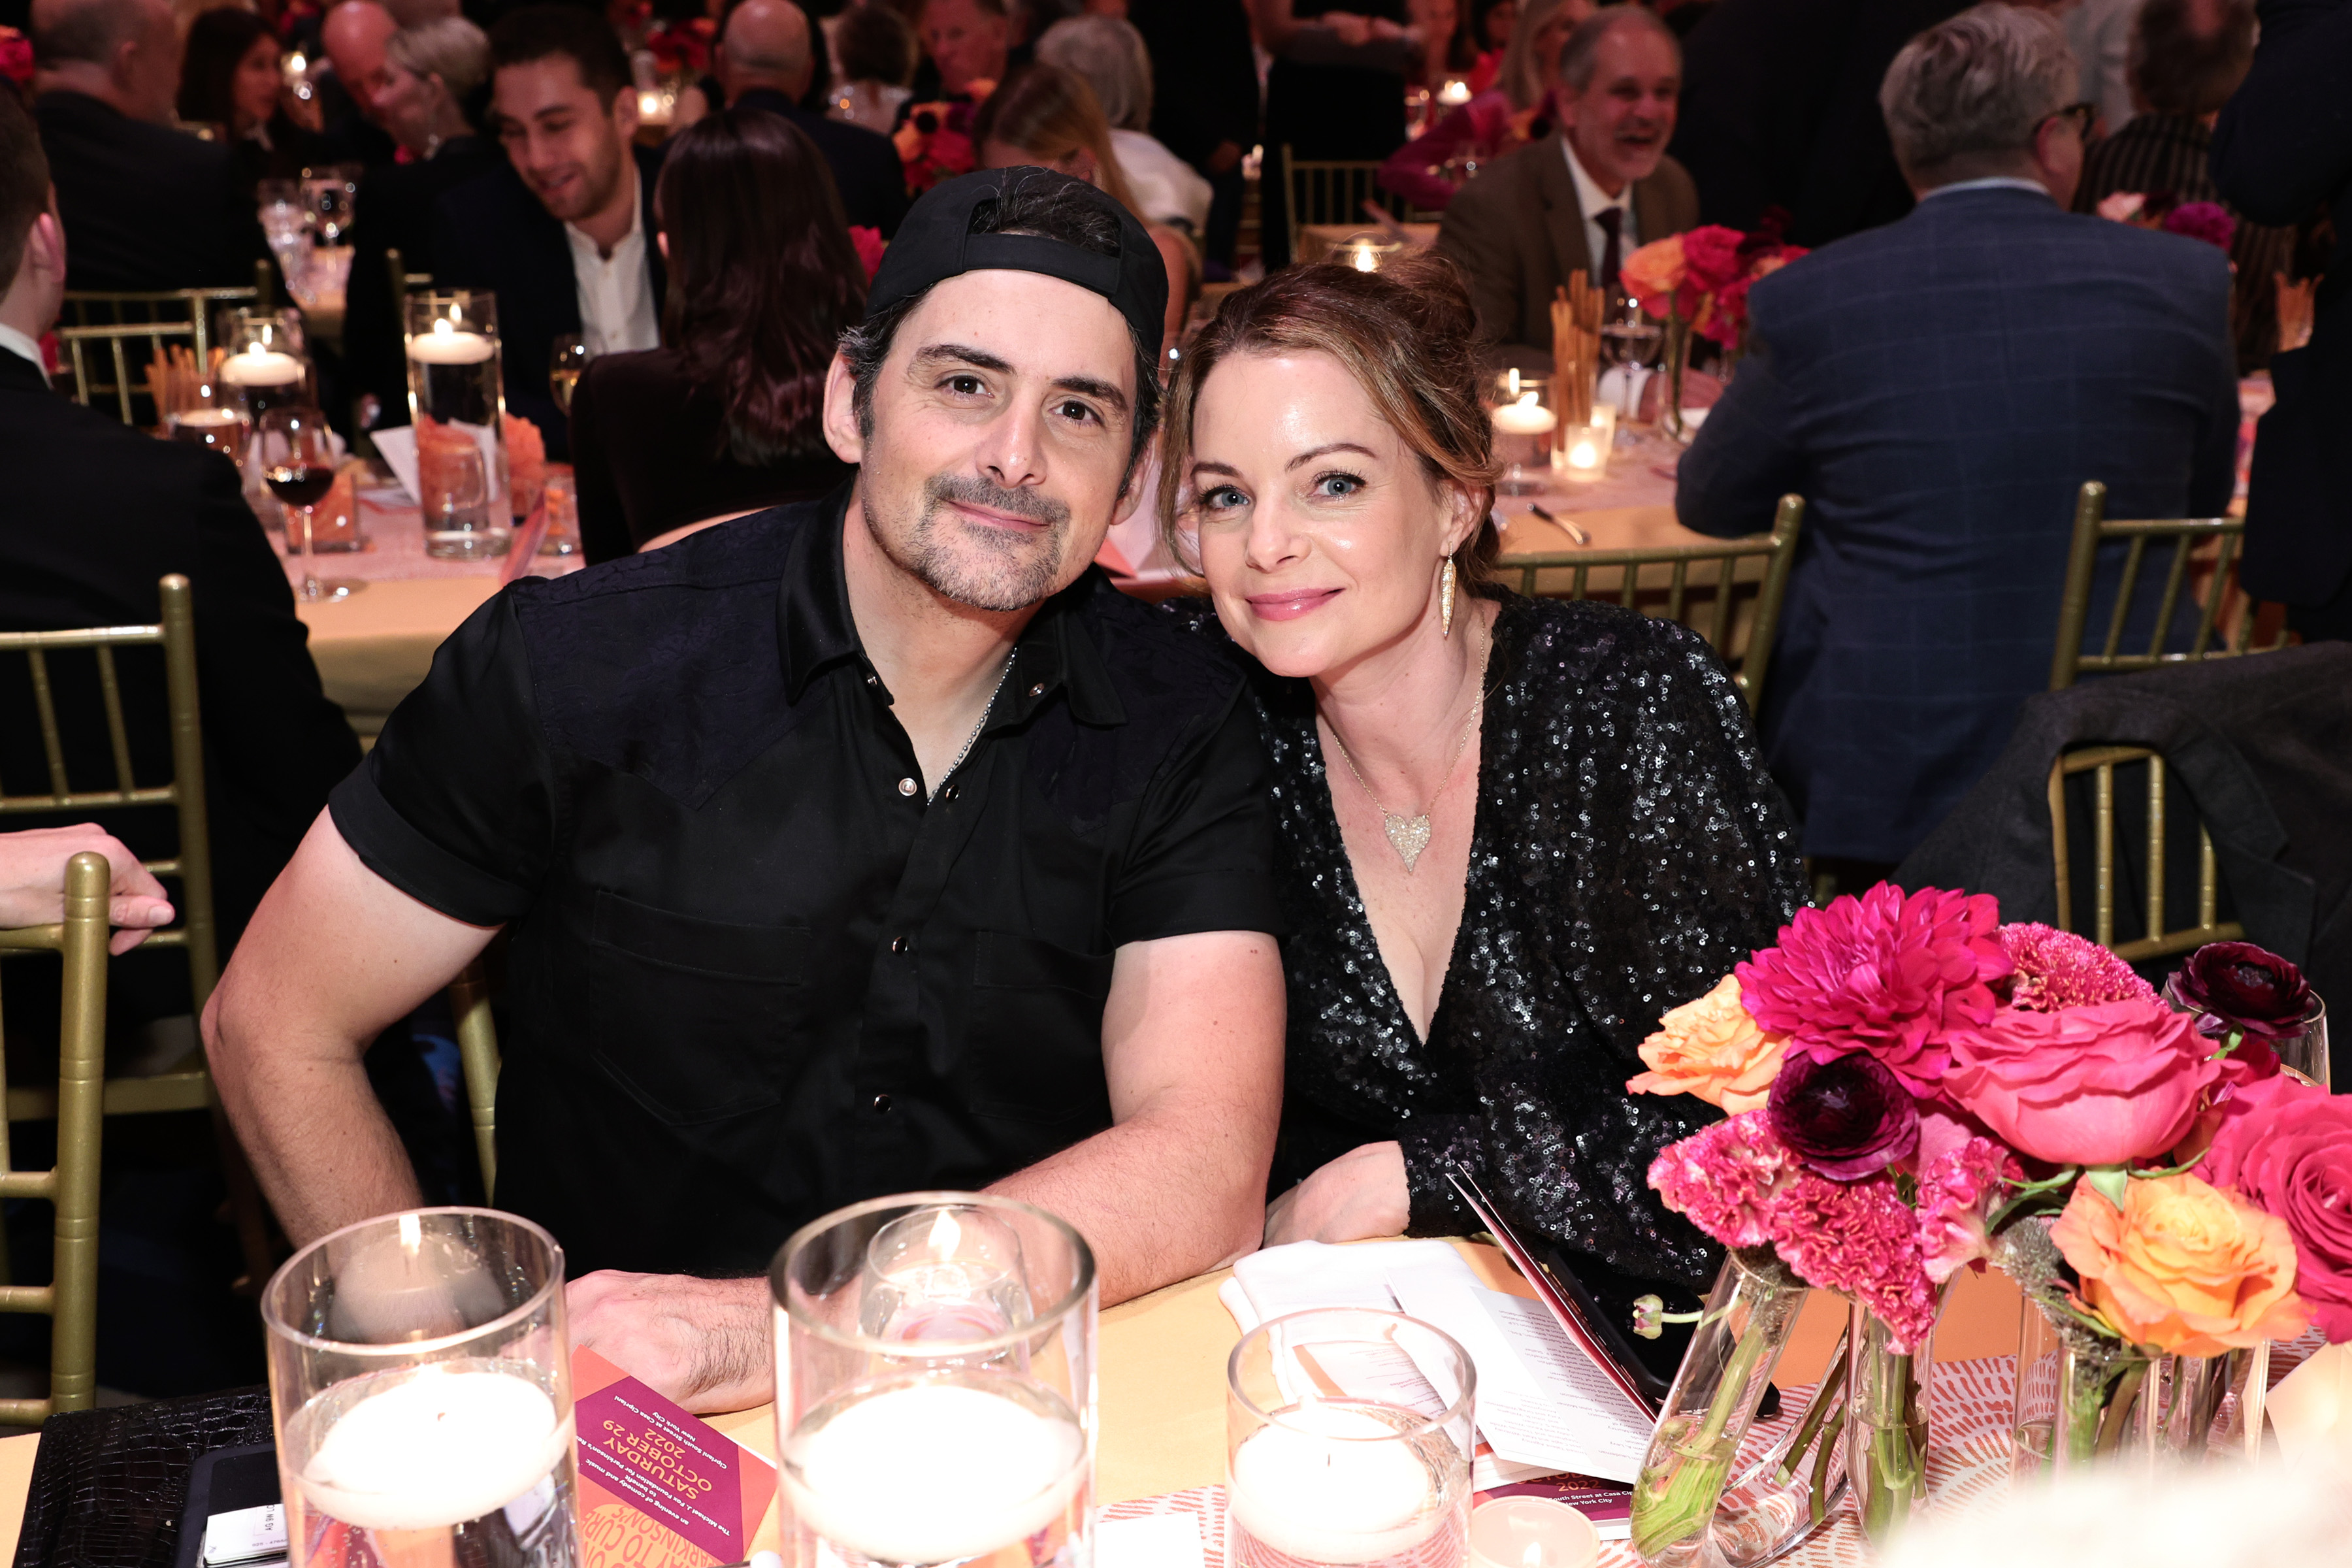 NEW YORK, NEW YORK - OCTOBER 29: Brad Paisley and Kimberly Williams-Paisley attend the 2022 A Funny Thing Happened On The Way To Cure Parkinson's at Cipriani South Street on October 29, 2022 in New York City.